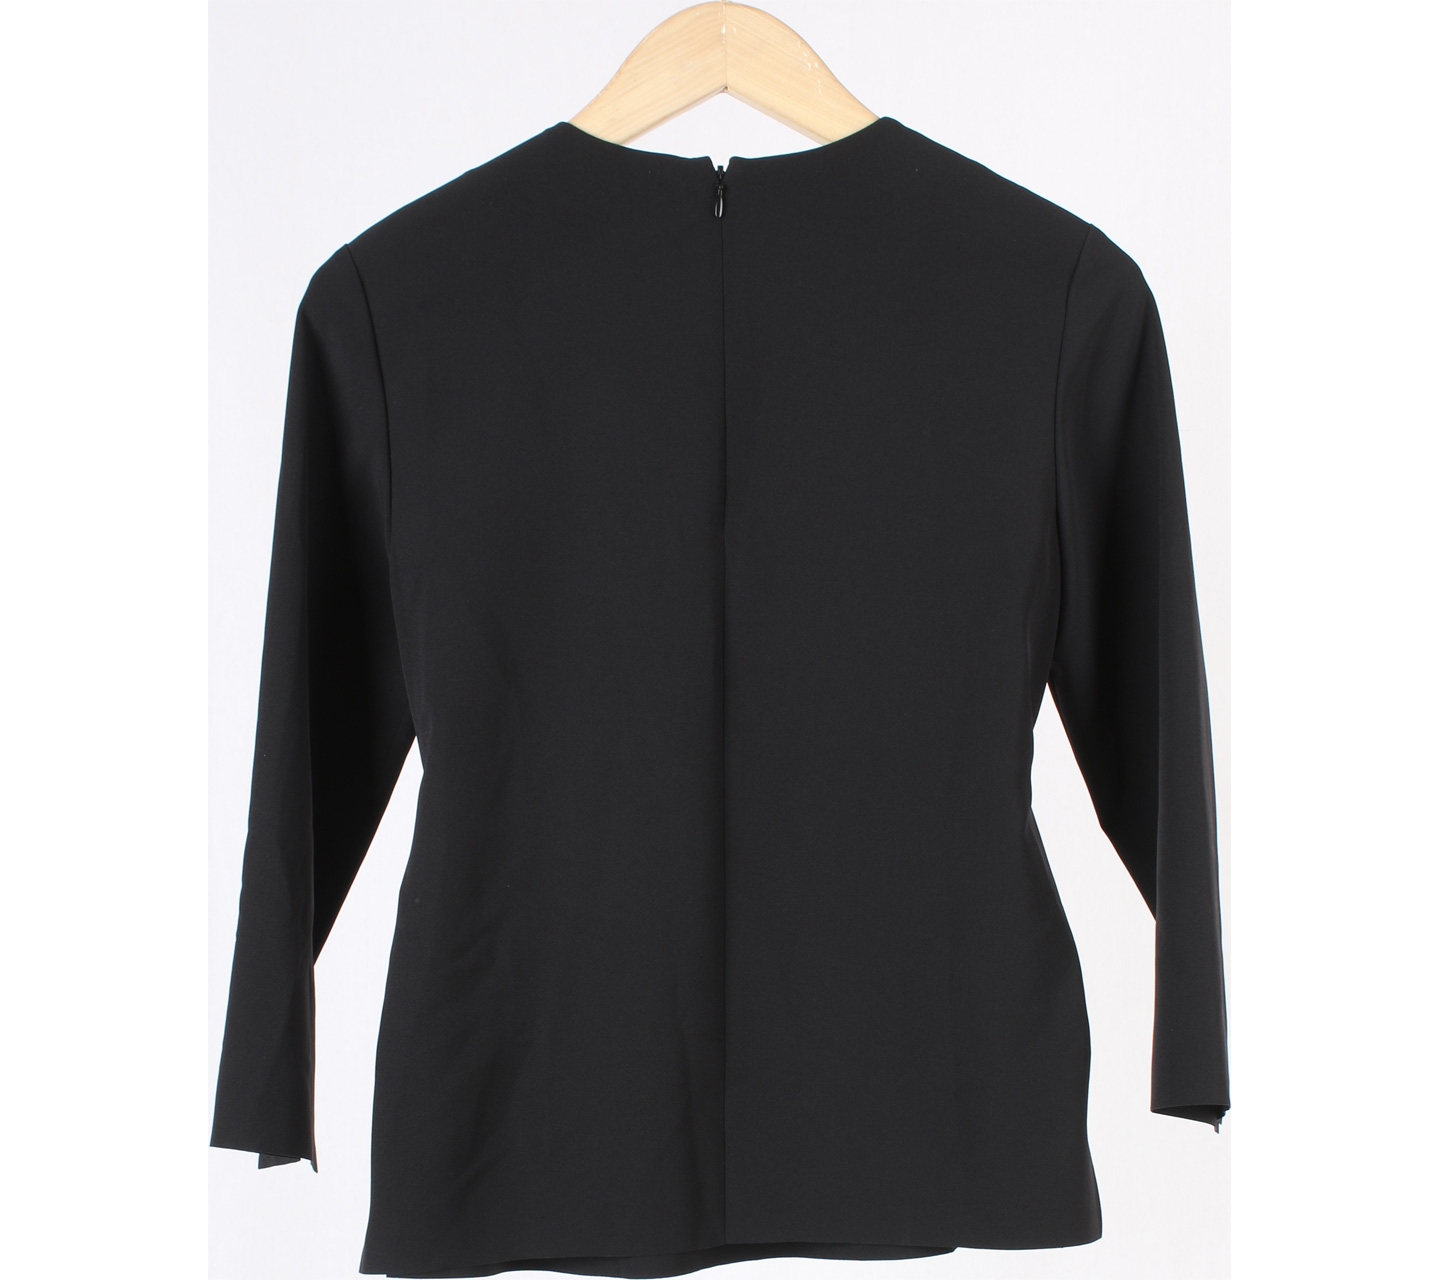 & Other Stories Black Blouse